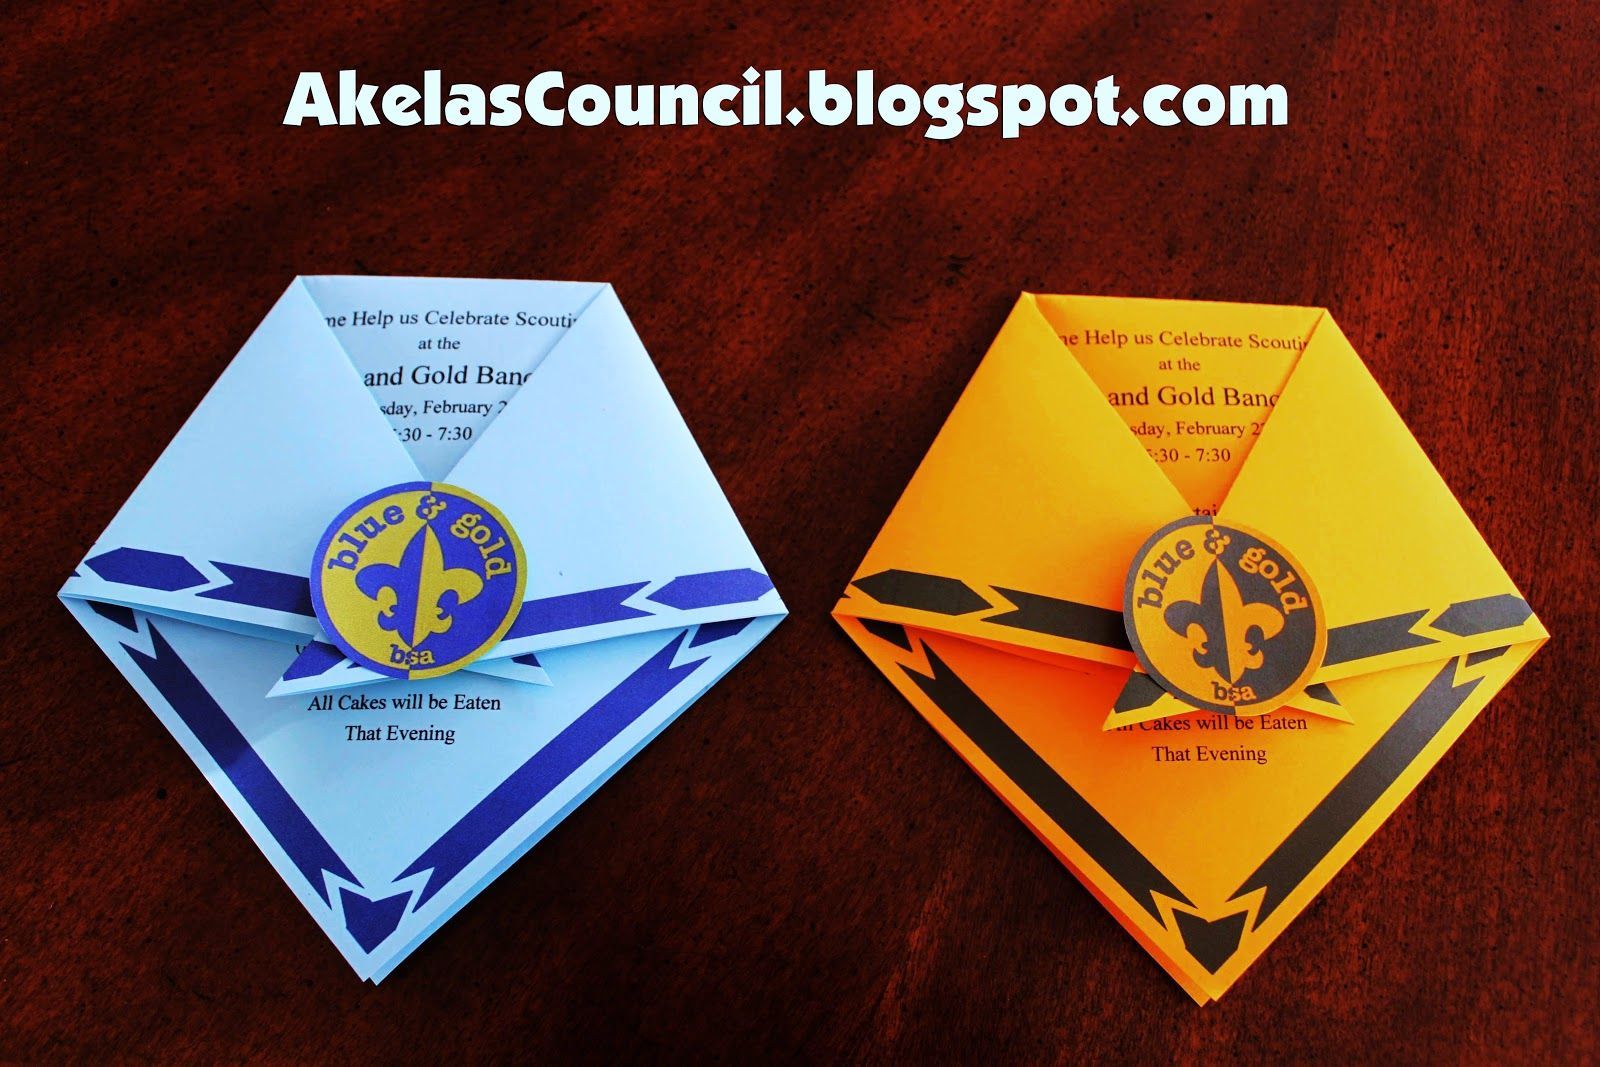 Cub Scout Blue & Gold Invitation Ideas that are PRINTABLE and look like Cub Scout Neckerchiefs.  This site has a lot of great Cub